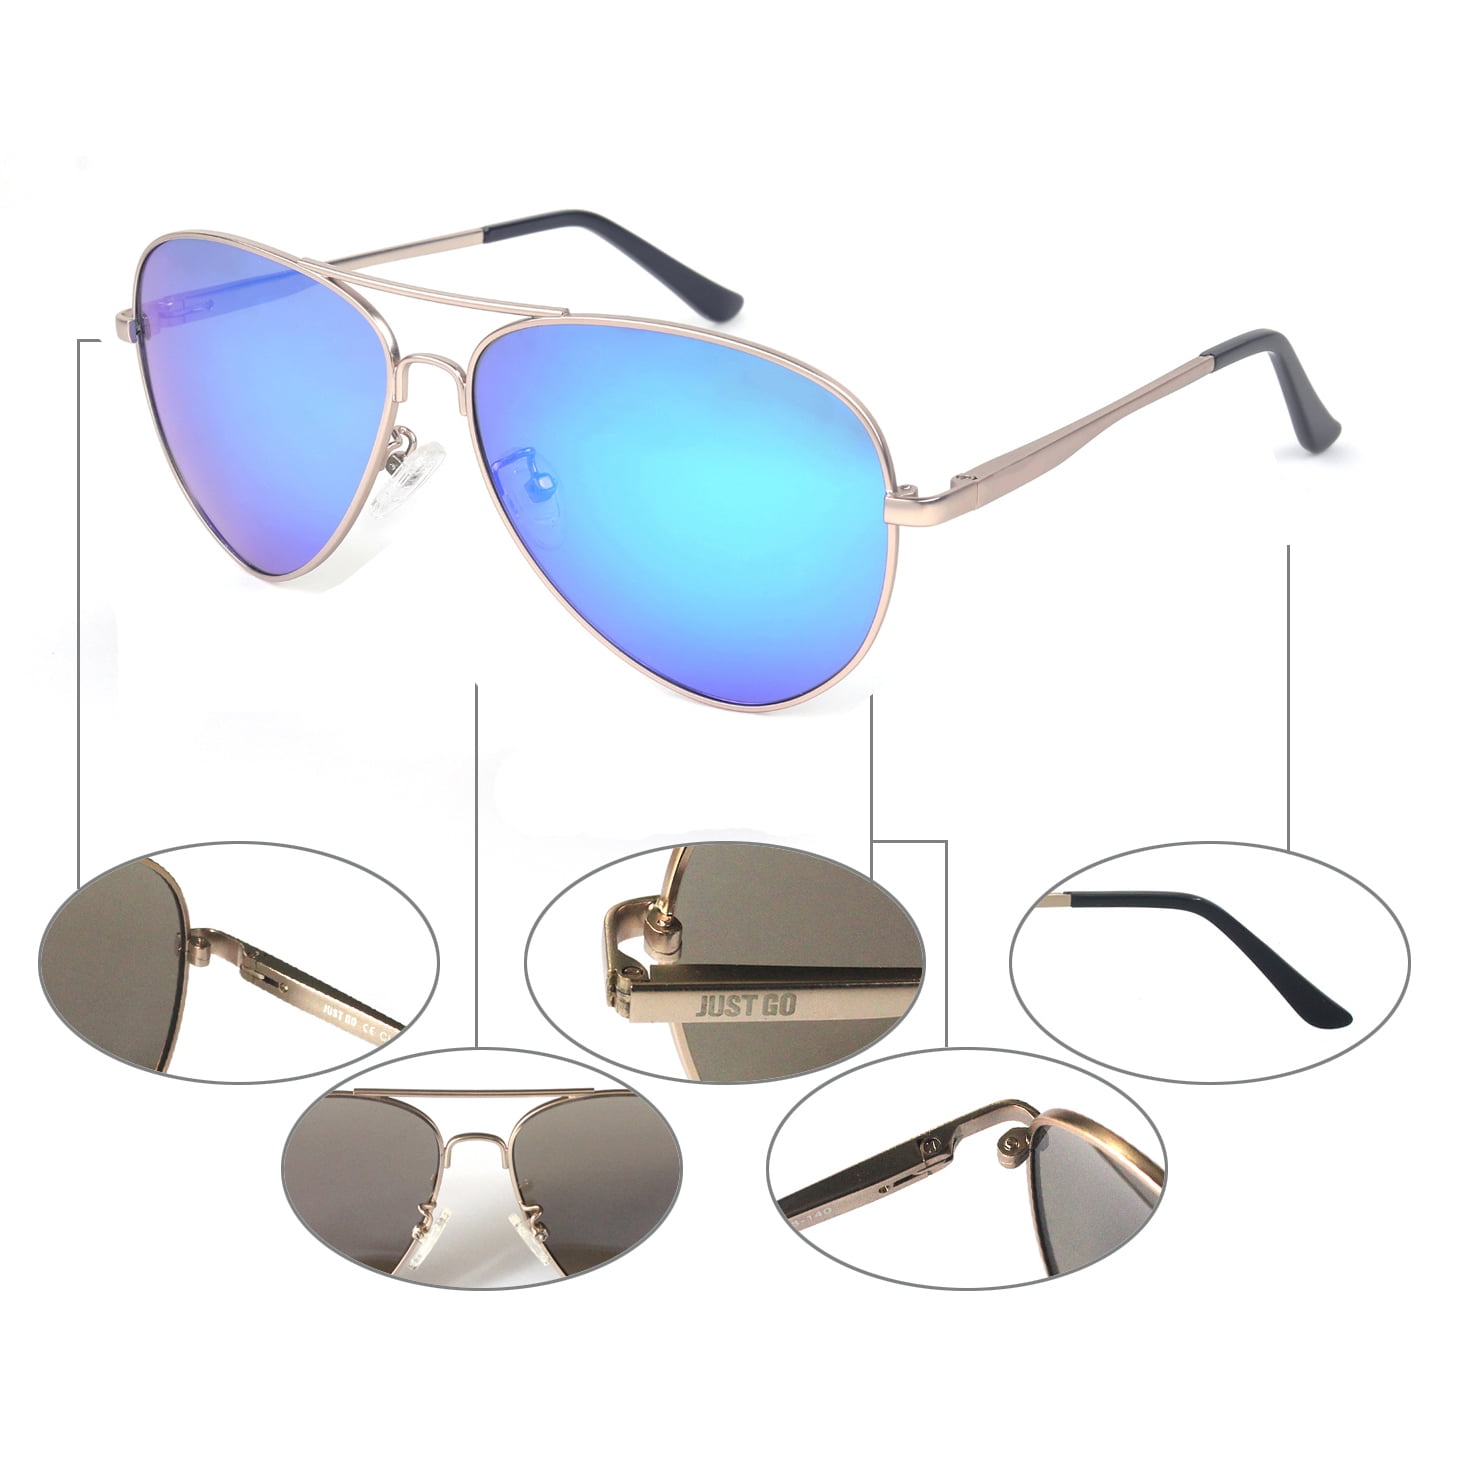 JUST GO Metal Frame Vintage Aviator Style Sunglasses with Case, Polarized  Lenses, 100% UV Protection, Matte Gold, Blue Revo